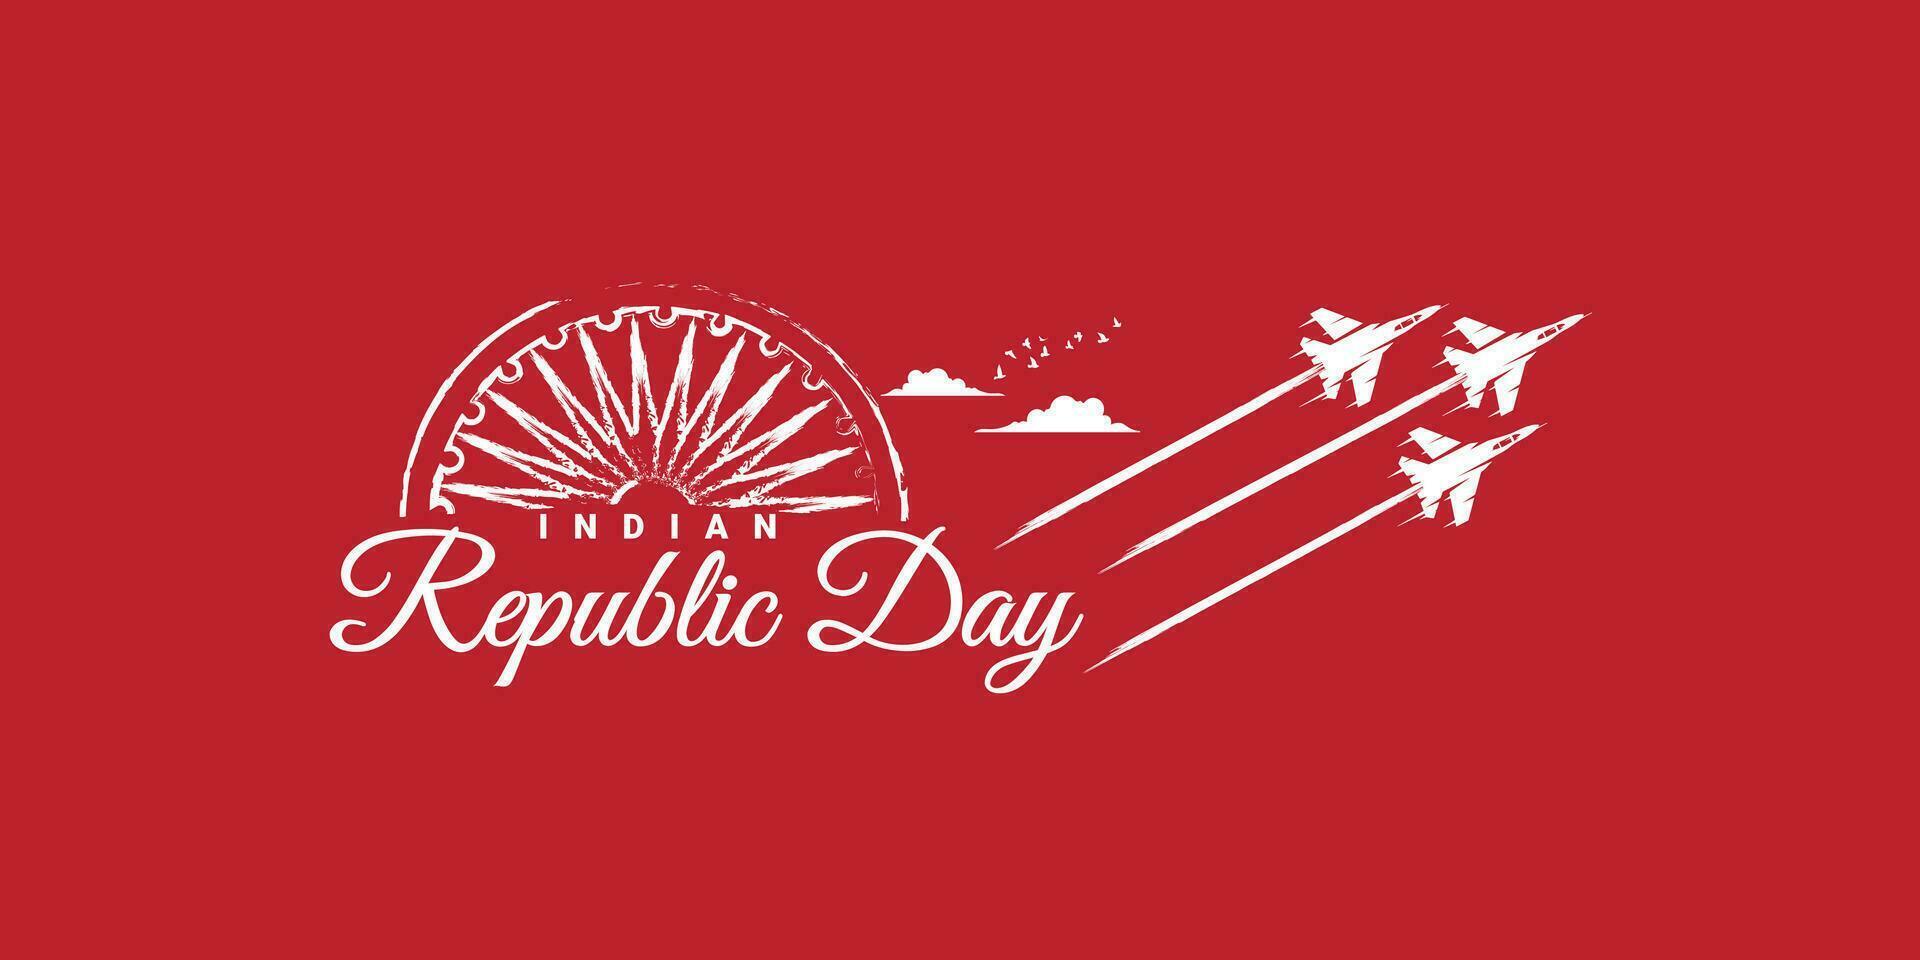 26th January Republic Day of India Celebration with Happy Indian Republic Day Template Banner Design. Happy Republic Day of India vector